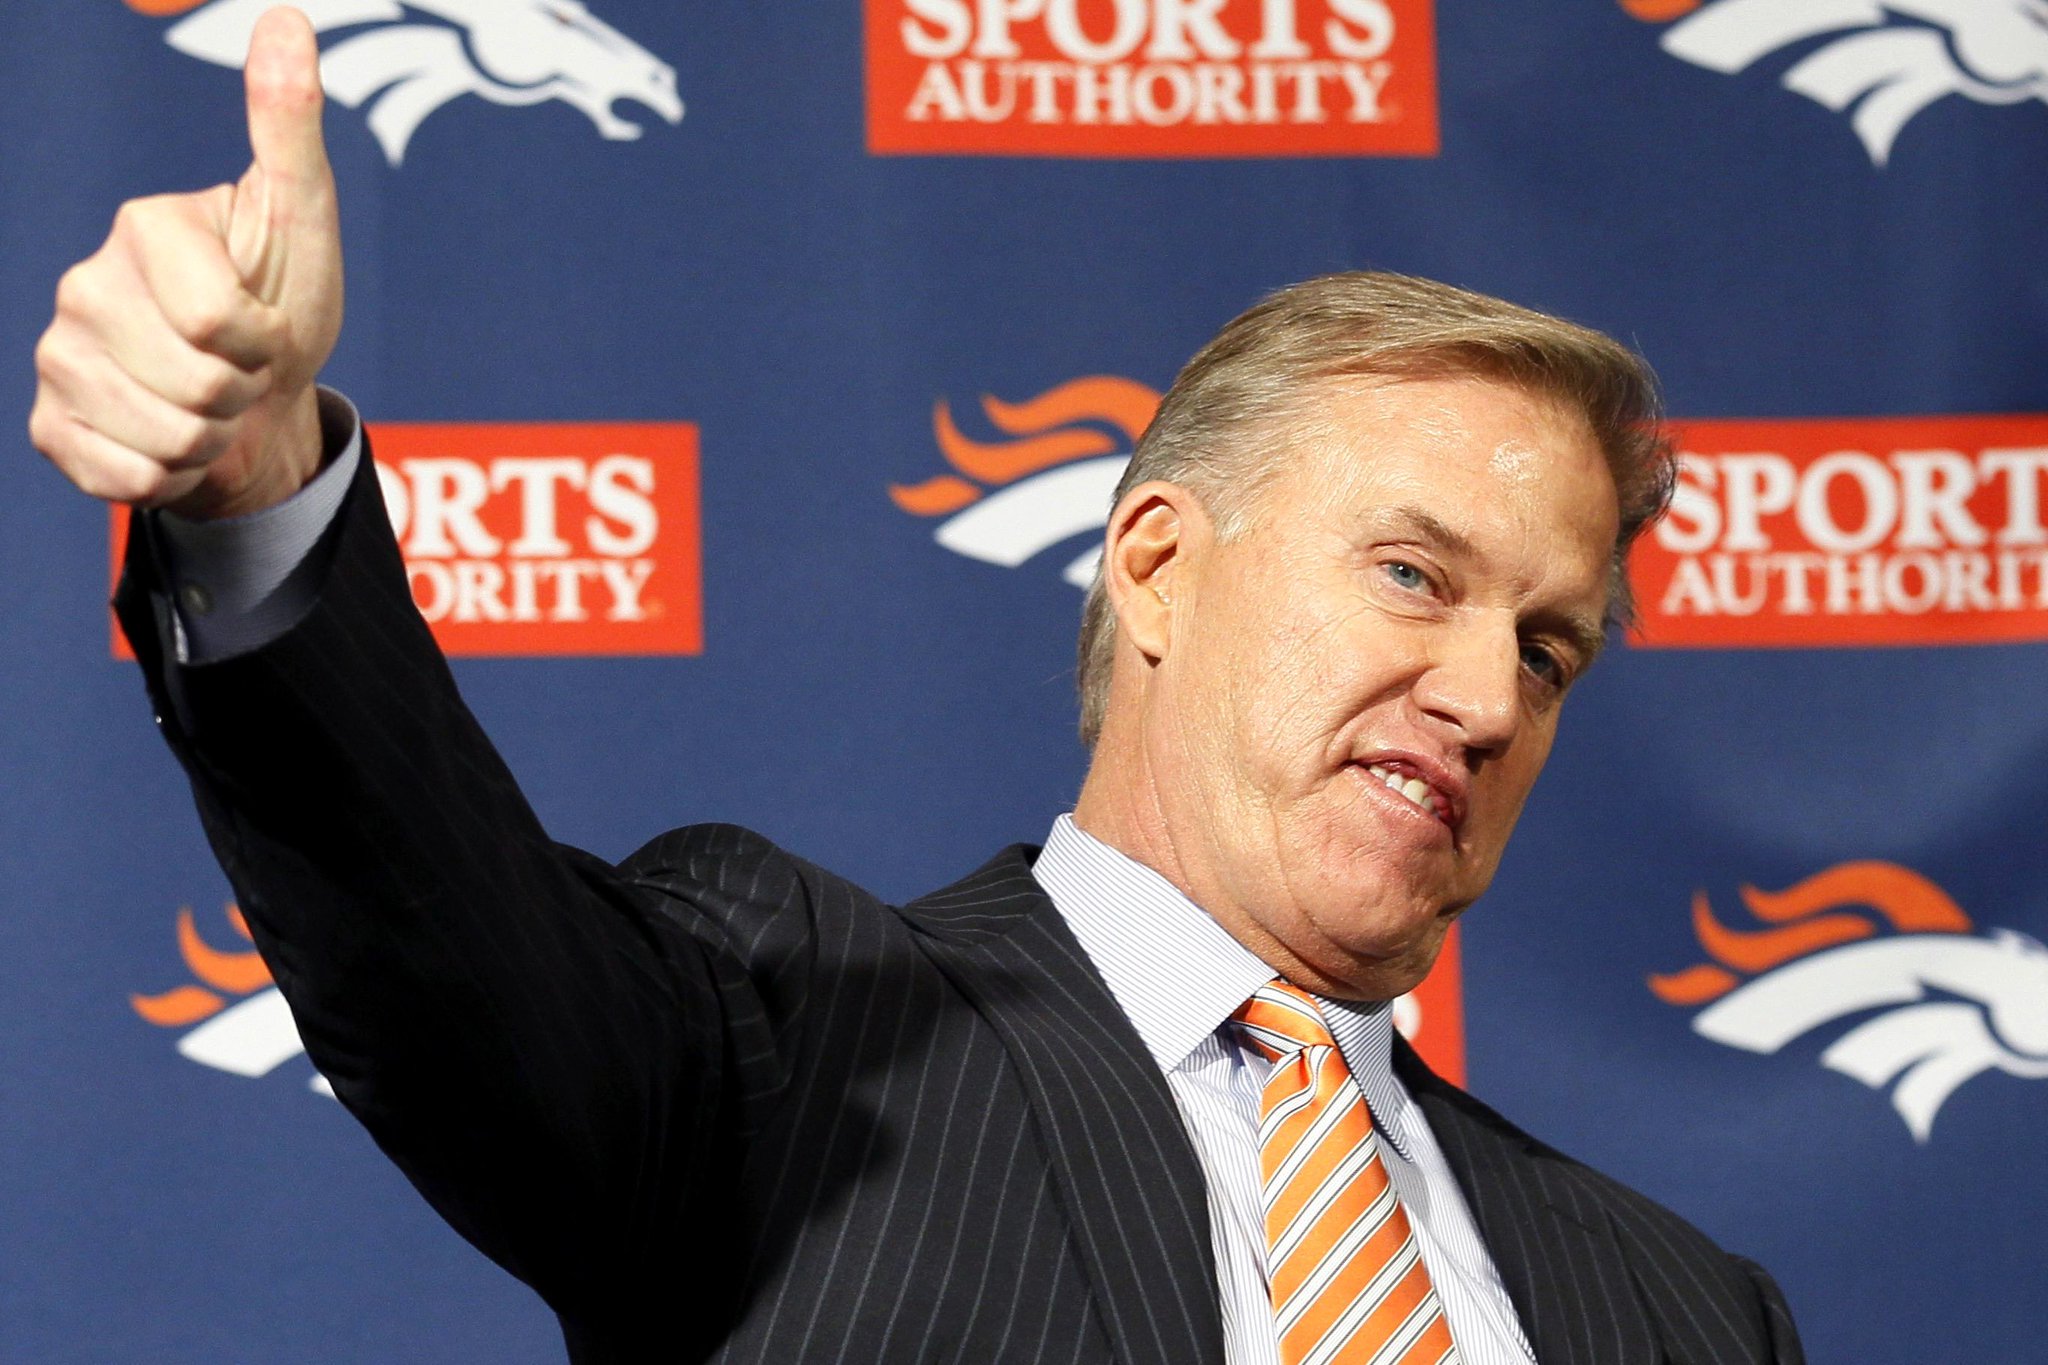 Join us in wishing GM, legendary QB and John Elway a happy 57th birthday!  